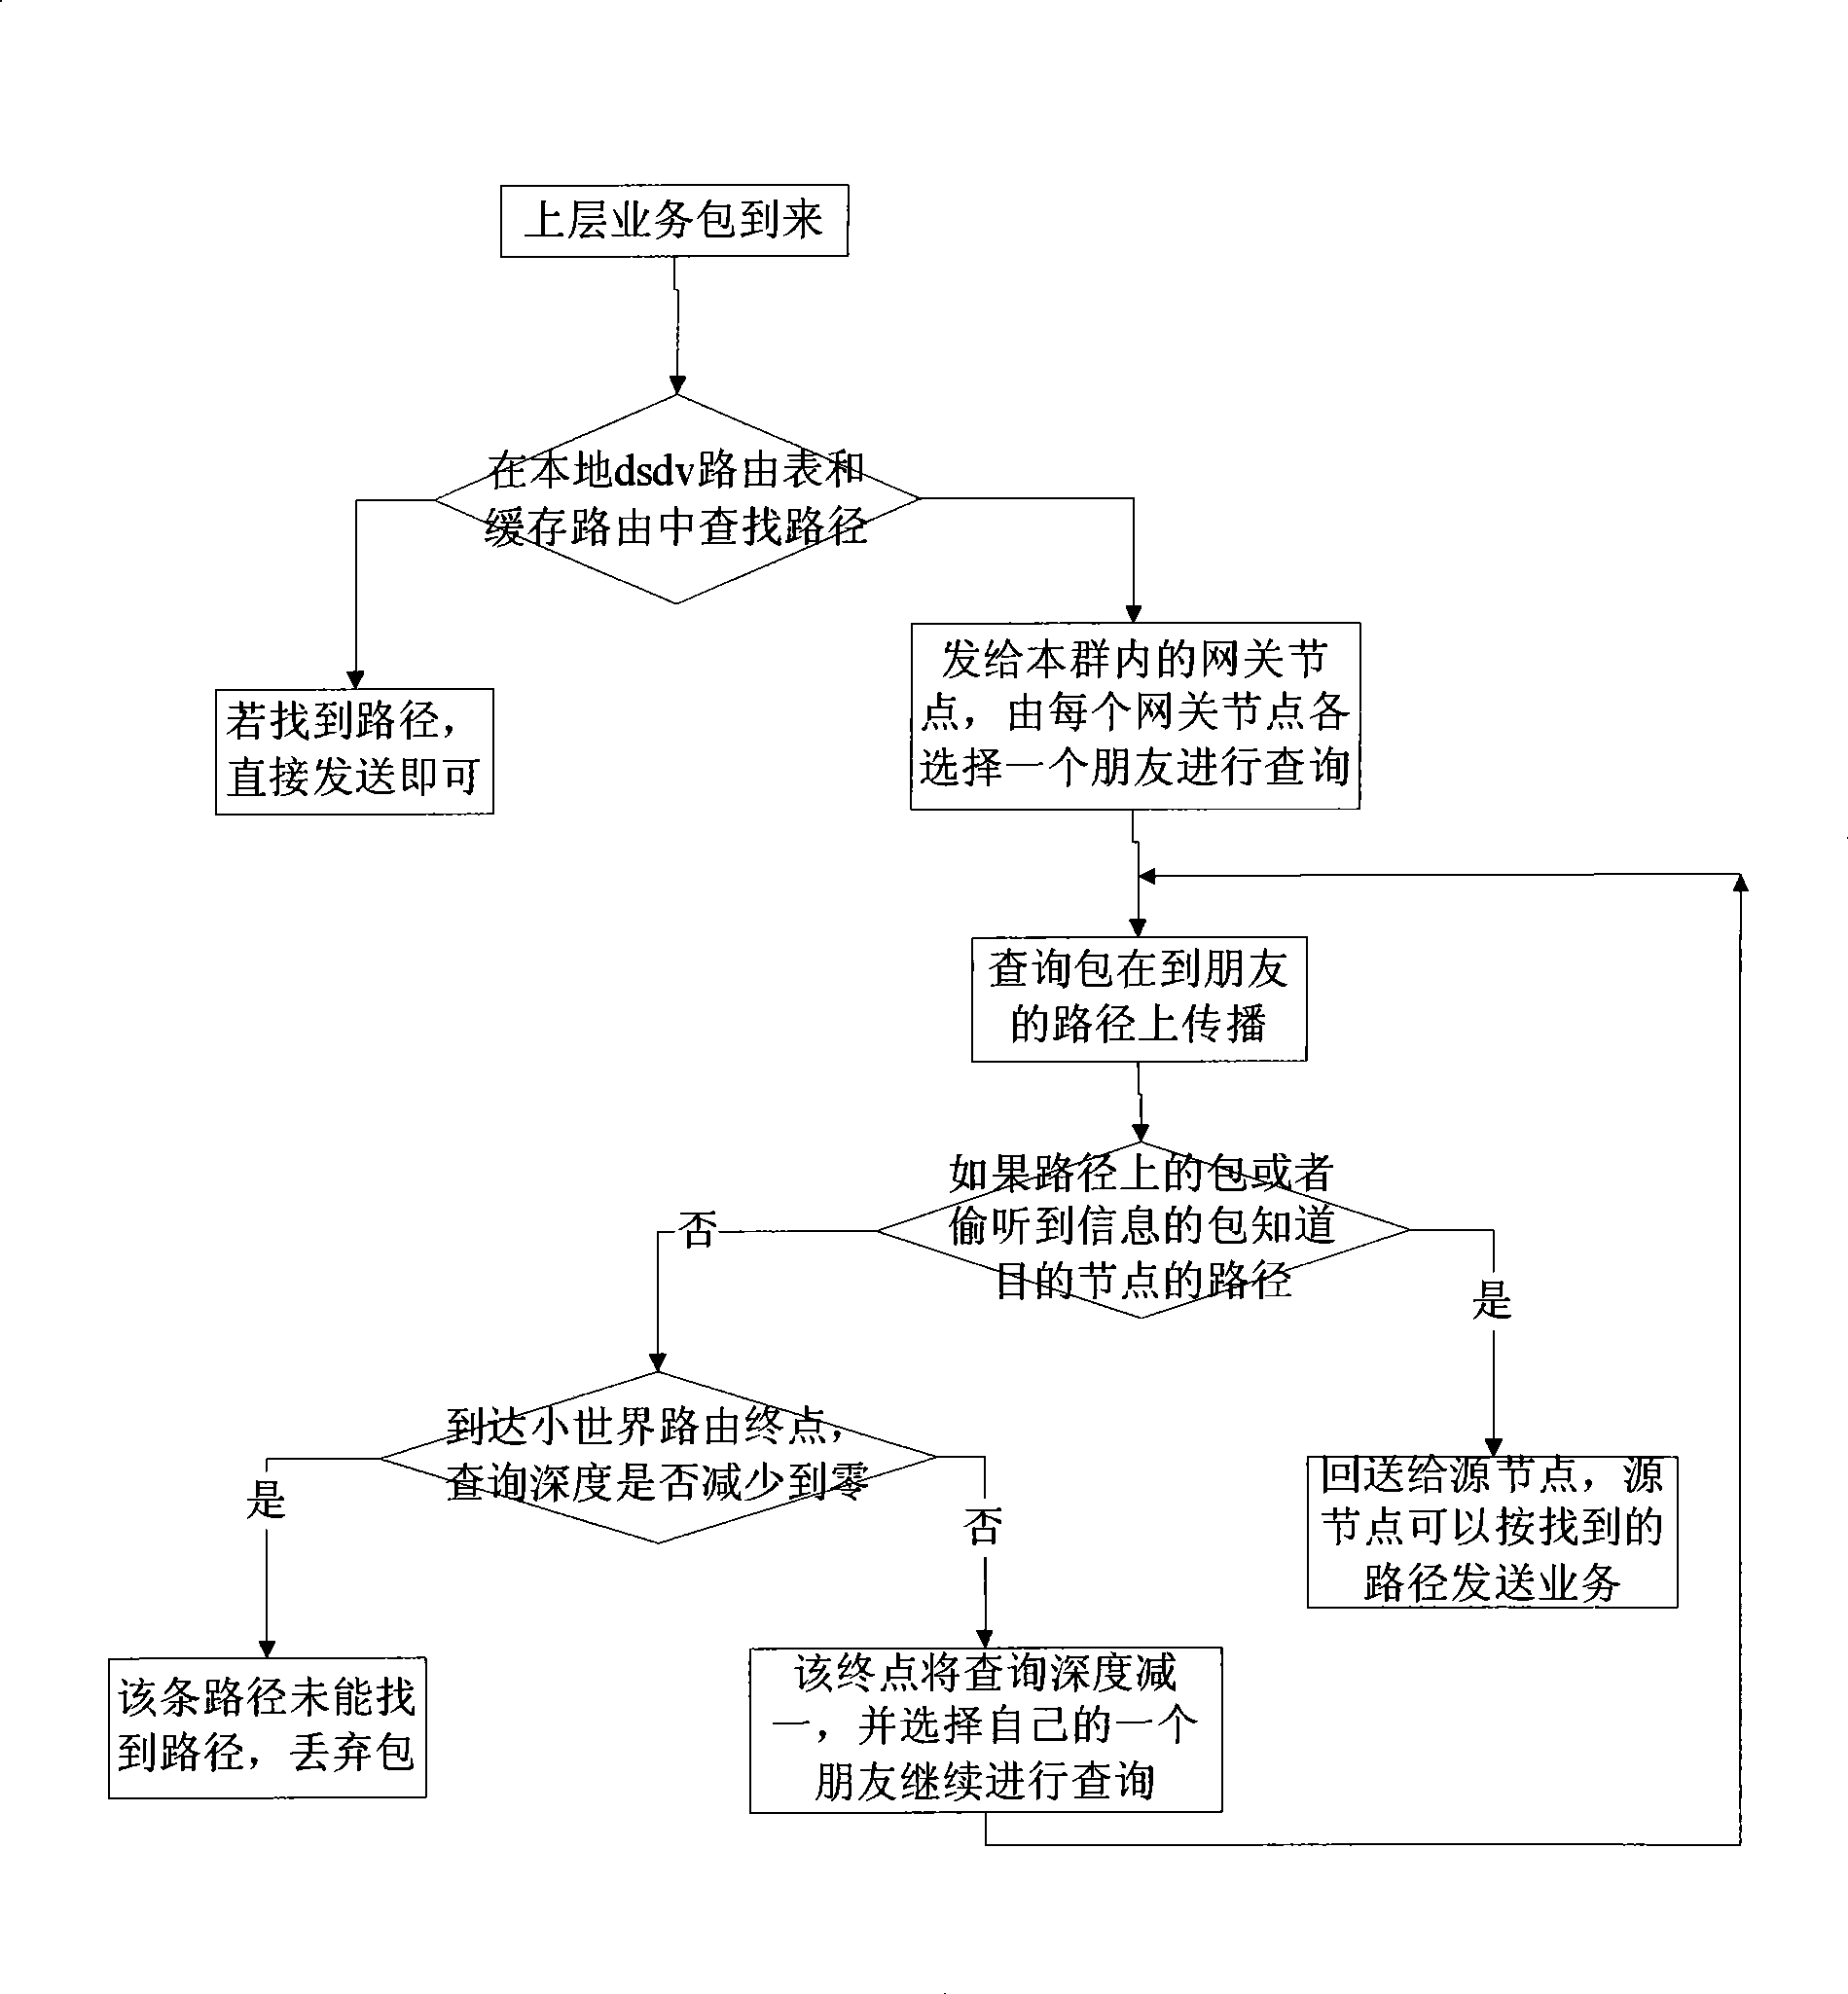 Cooperative routing method for large-scale wireless distribution network